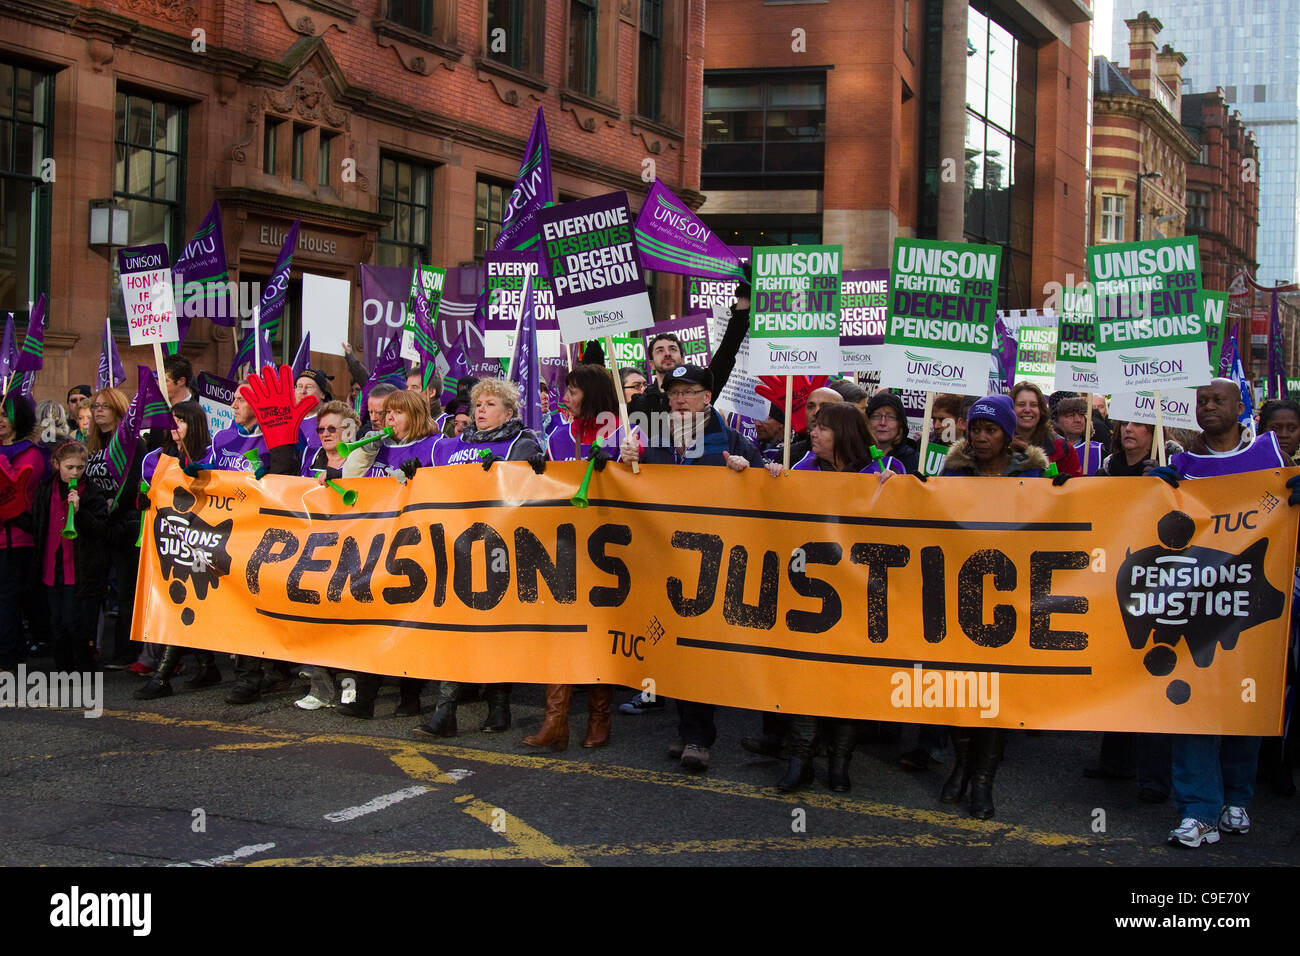 Unison March Manchester, UK. 30th Nov, 2011. Striking UNISON public sector workers march in Manchester City Centre, in protest over Government pension plans, displaying large 'pensions Justice' banner. Stock Photo